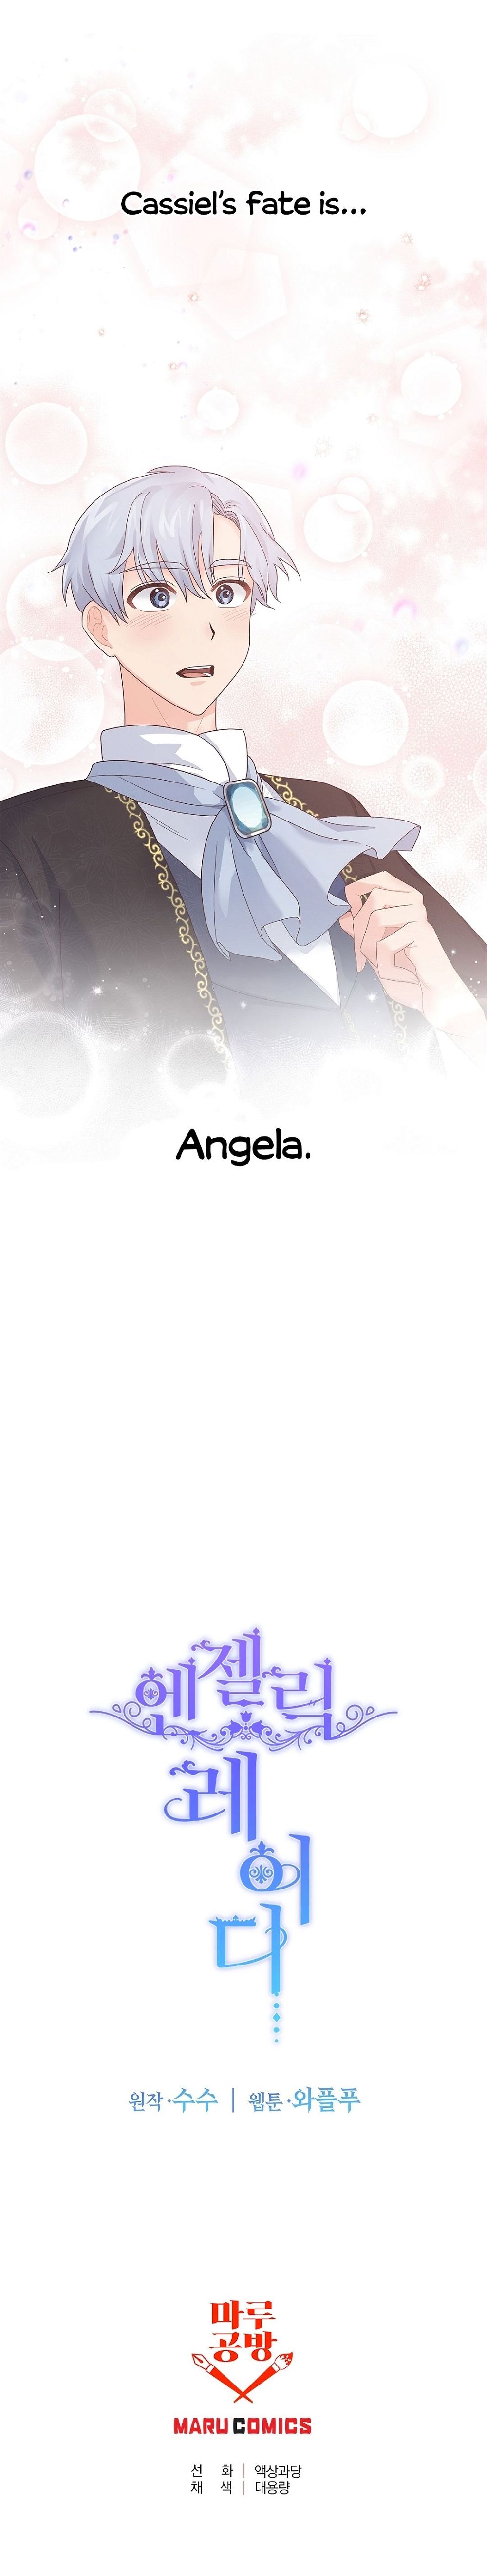 Angel or Villainess chapter 7 - Page 11